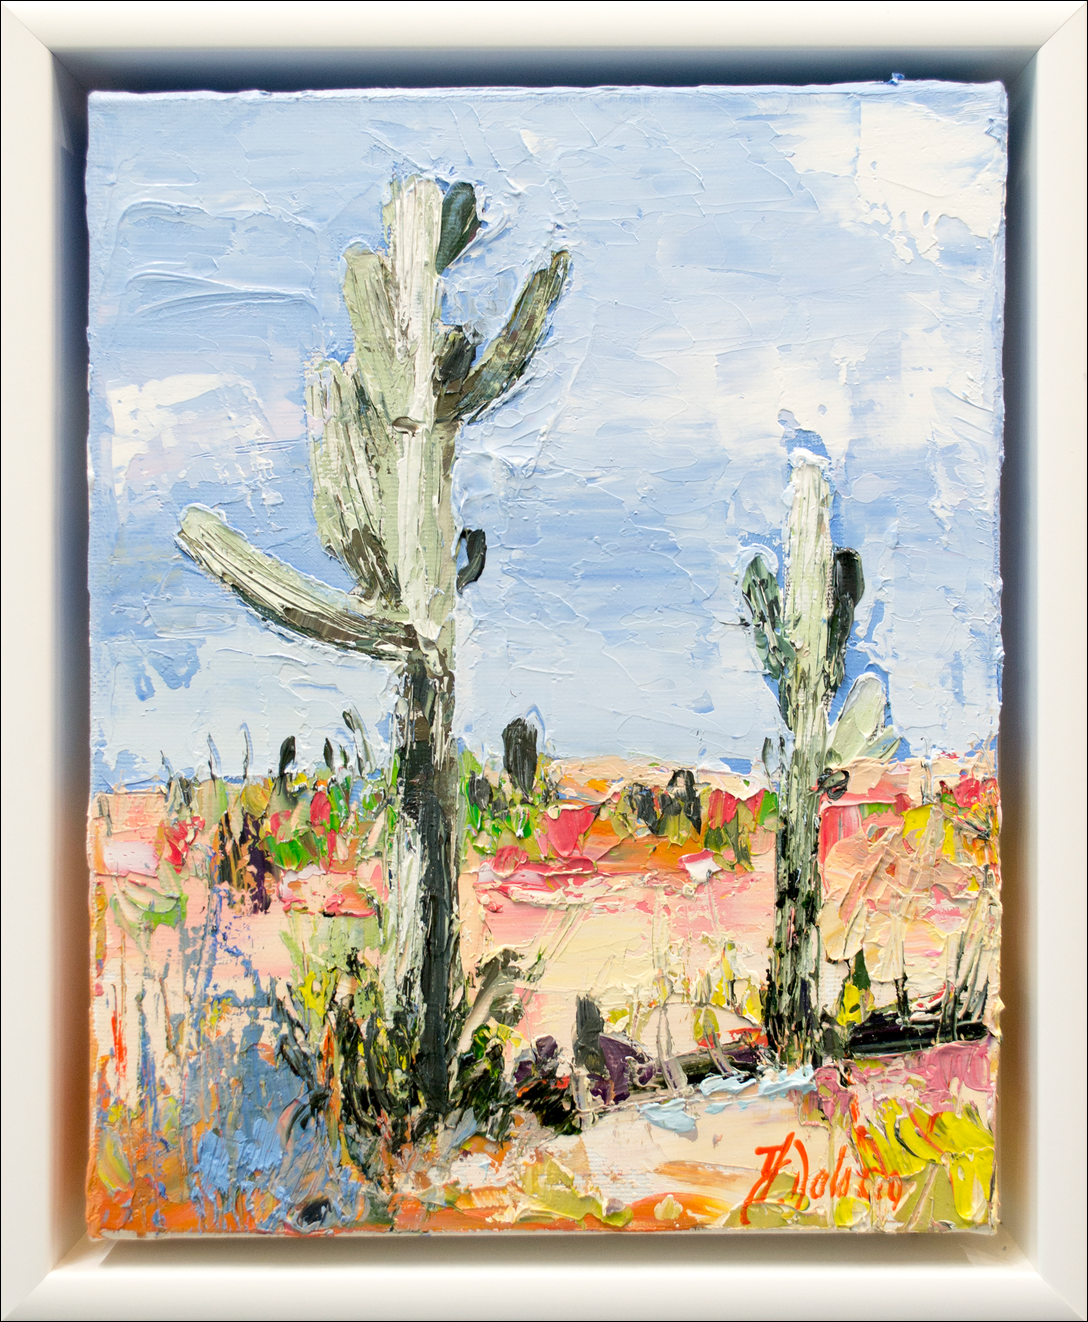 Framed Front View Of Landscape Painting "Desert Off Track Scottsdale Arizona 1" By Judith Dalozzo